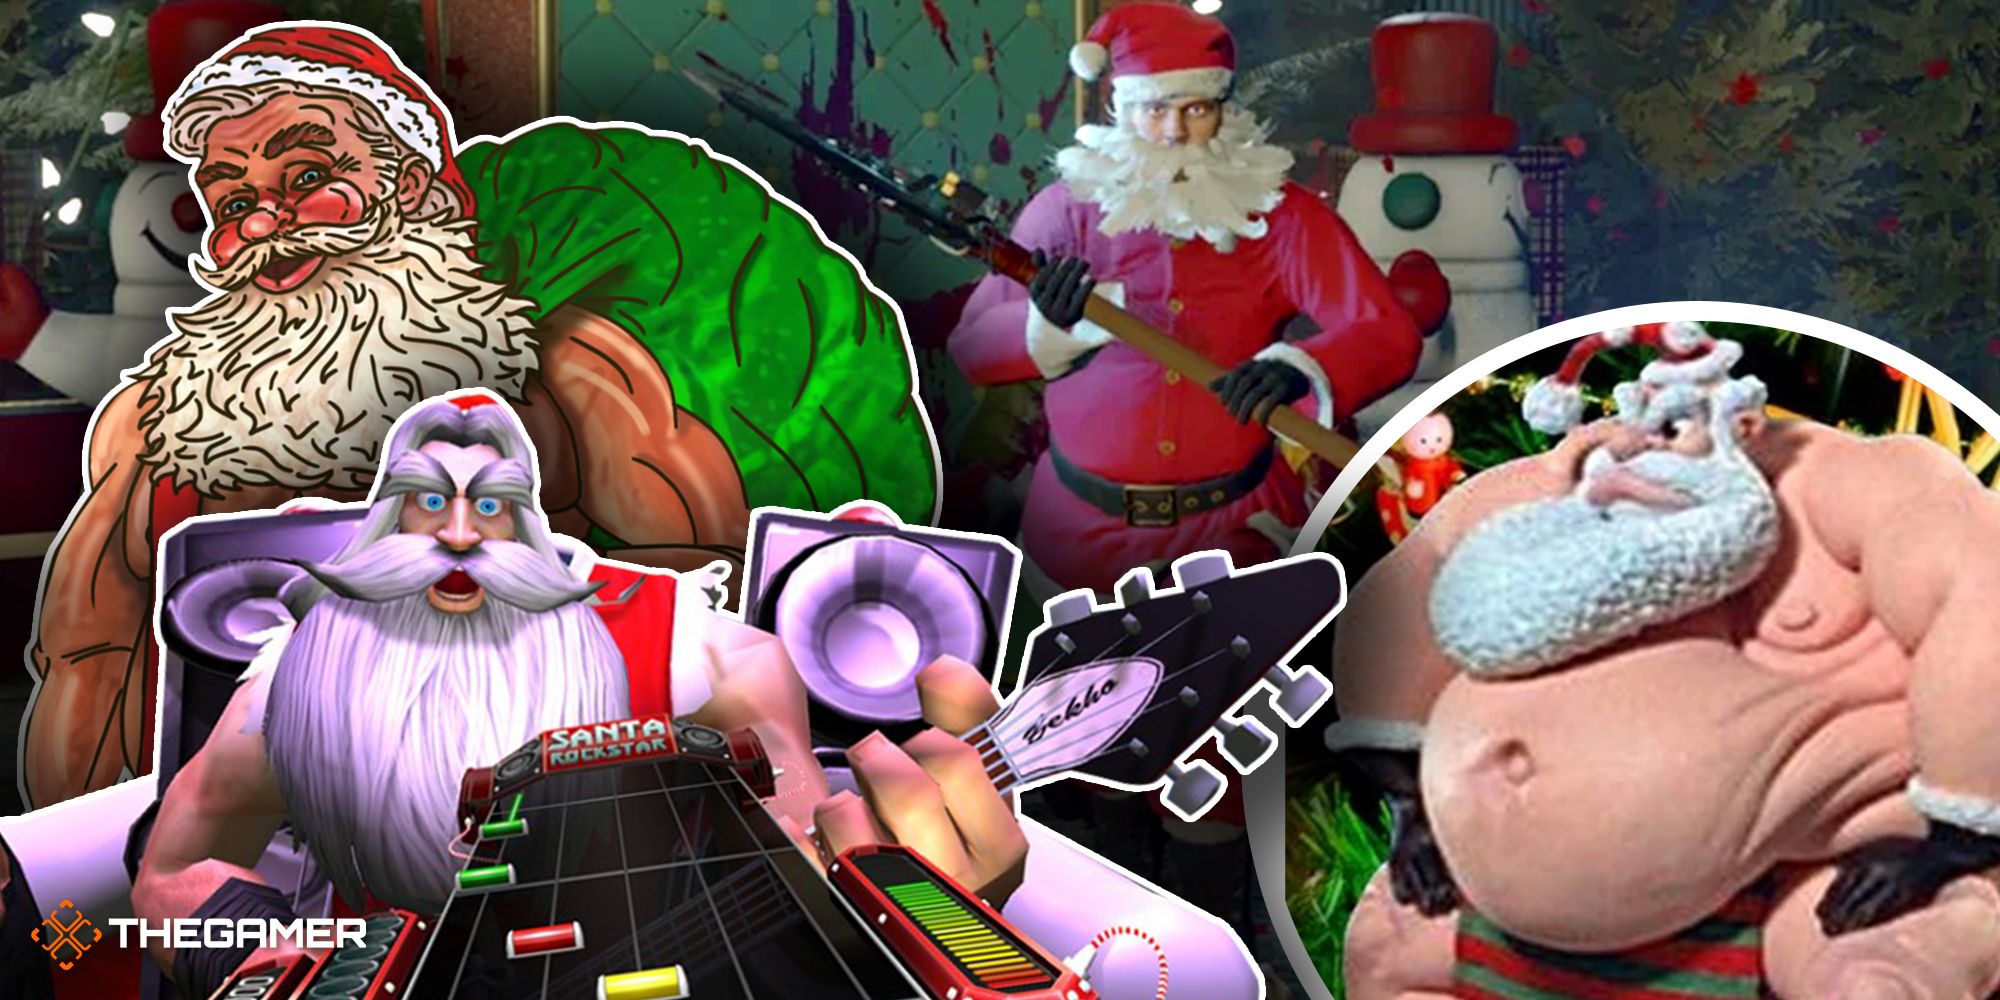 A multiverse of Santa Claus's come together in this wacky video game cameo list.